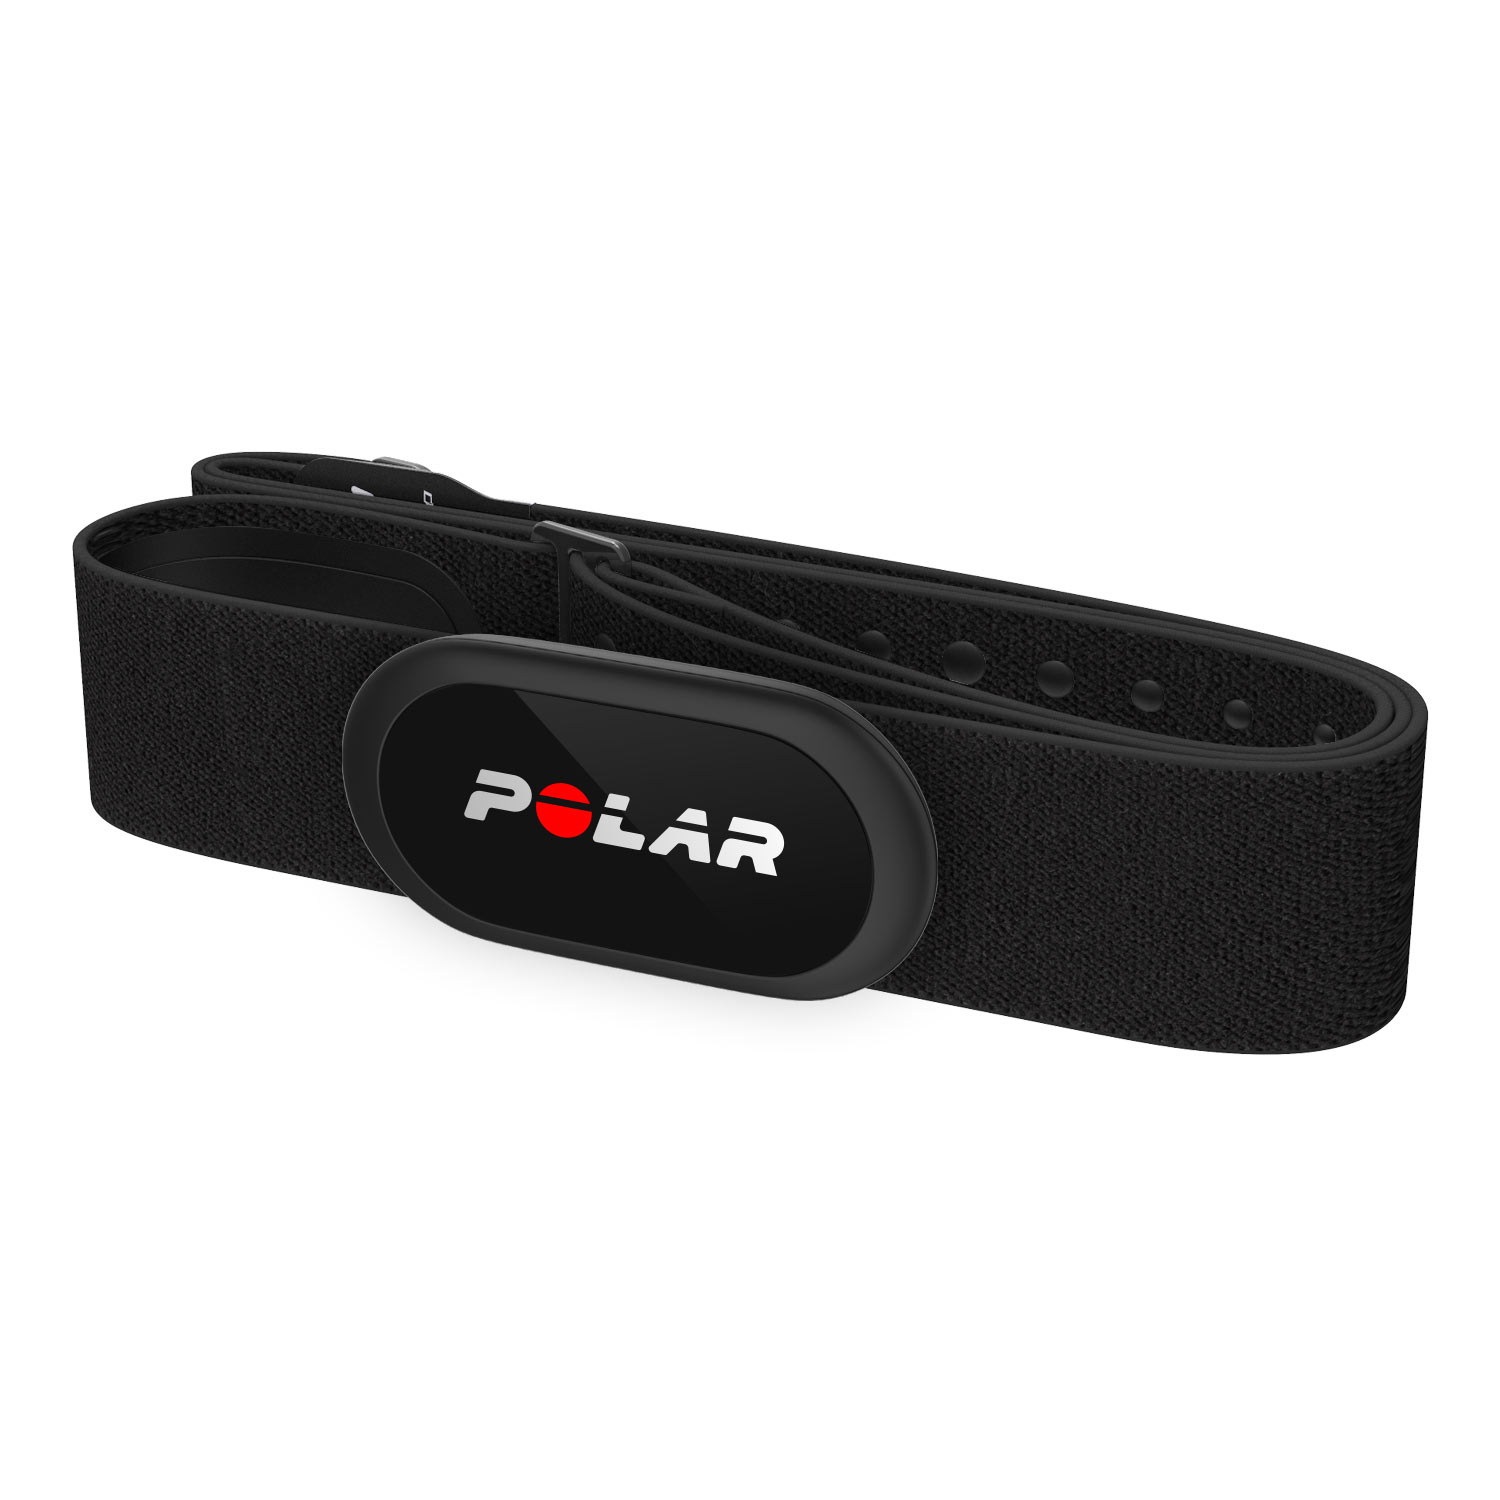 polar h10 compatible apps android